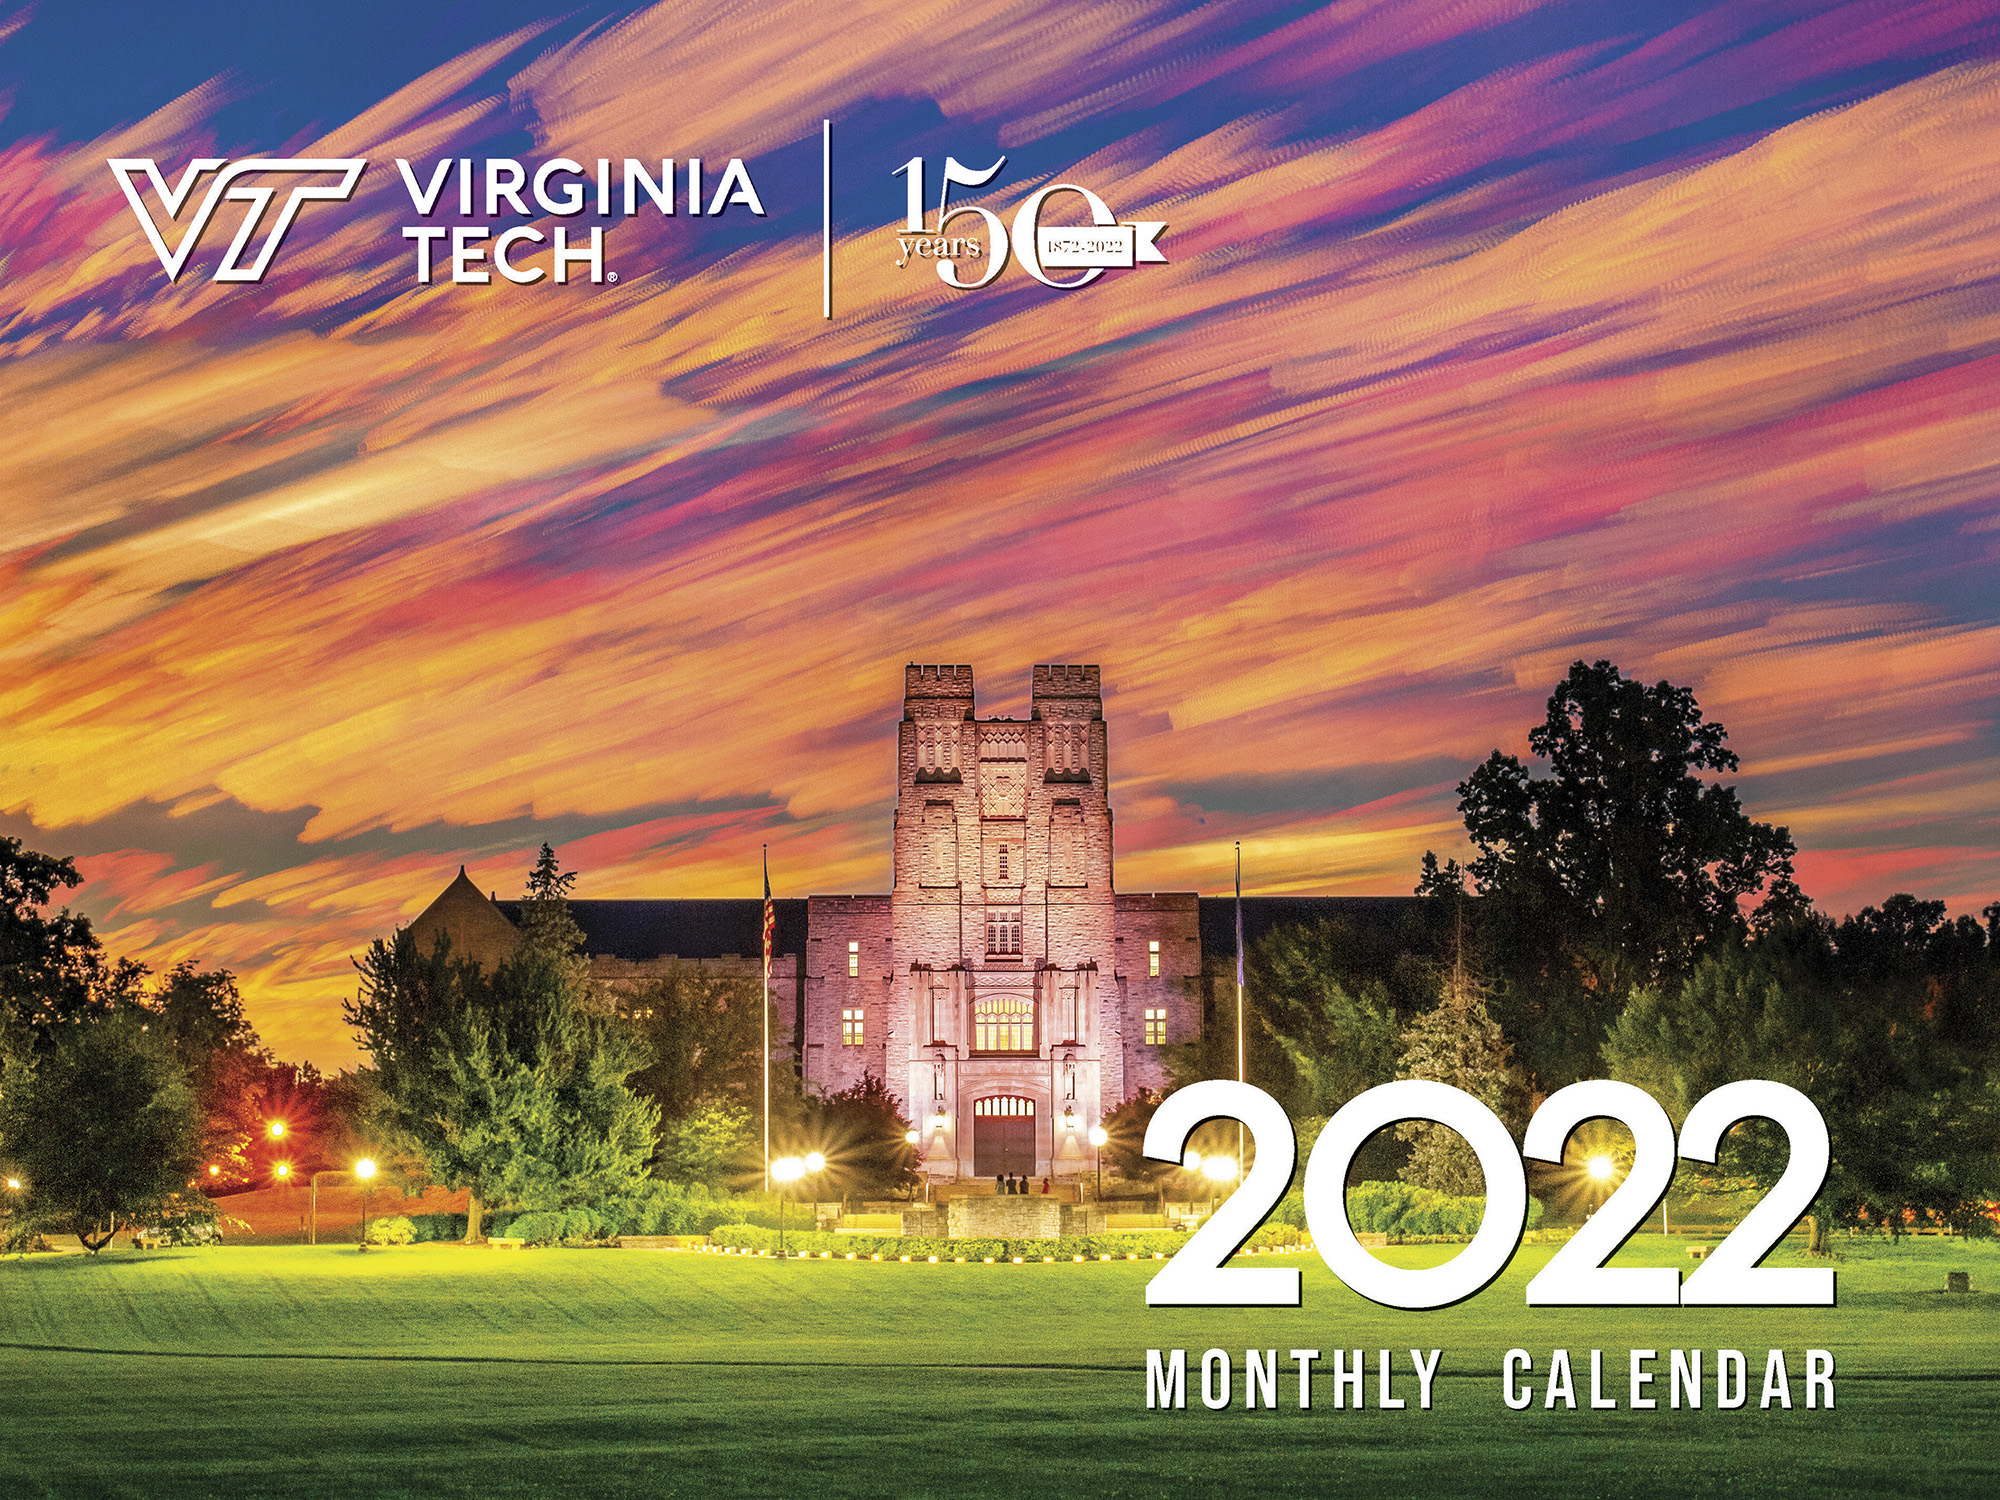 City Tech 2022 Calendar Ivan Morozov On Twitter: "Folks, Don't Wait Until The Last Minute To Order  The 2022 Vt Wall Calendar. Only A Limited Number Of Them Are Left, And Usps  Shipping Delays May Become